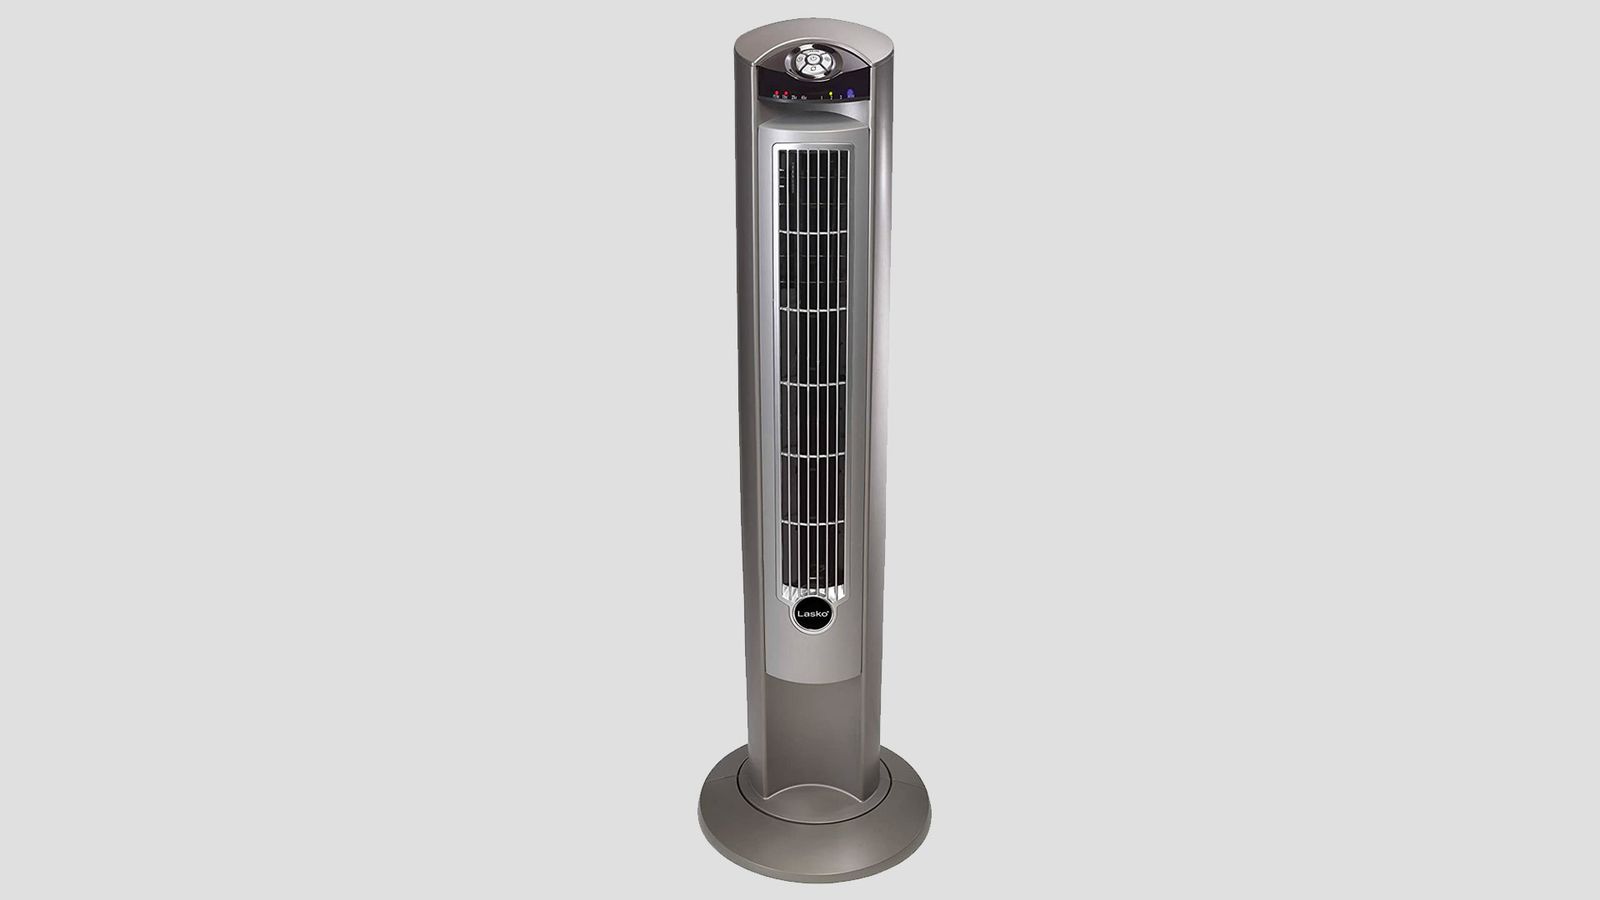 Lasko 2551 product image of a grey and silver tower fan.